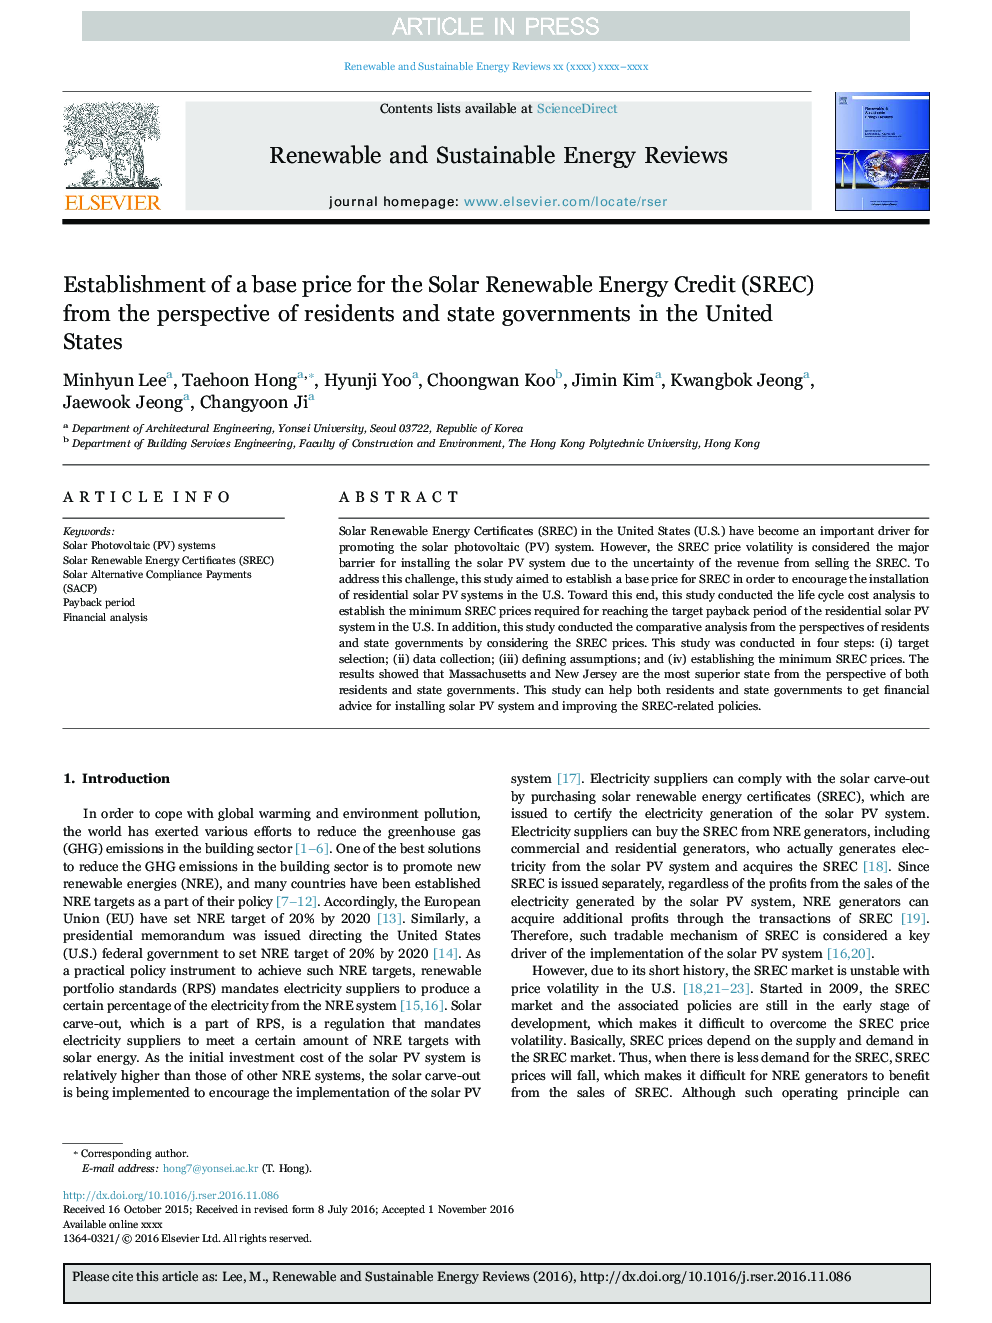 Establishment of a base price for the Solar Renewable Energy Credit (SREC) from the perspective of residents and state governments in the United States